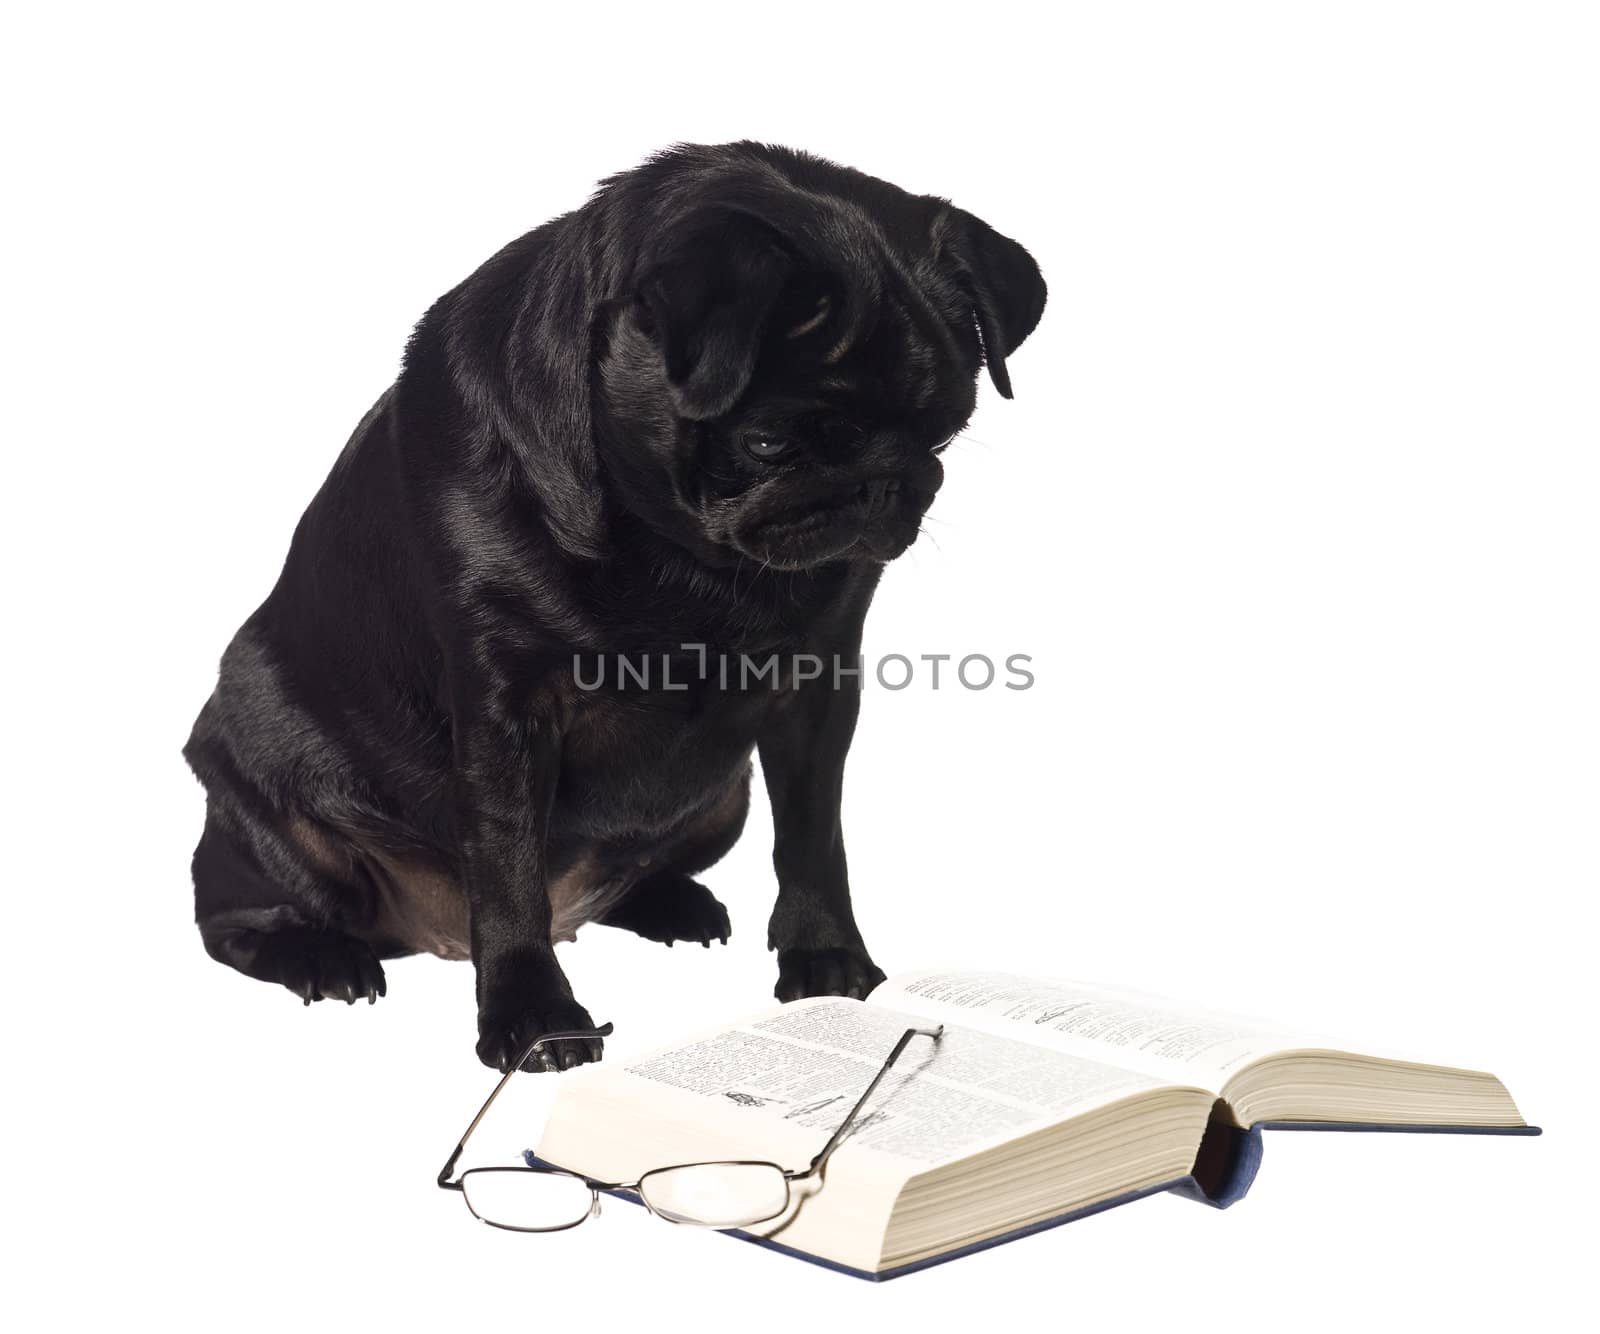 Dog reading a book isolated on a white background